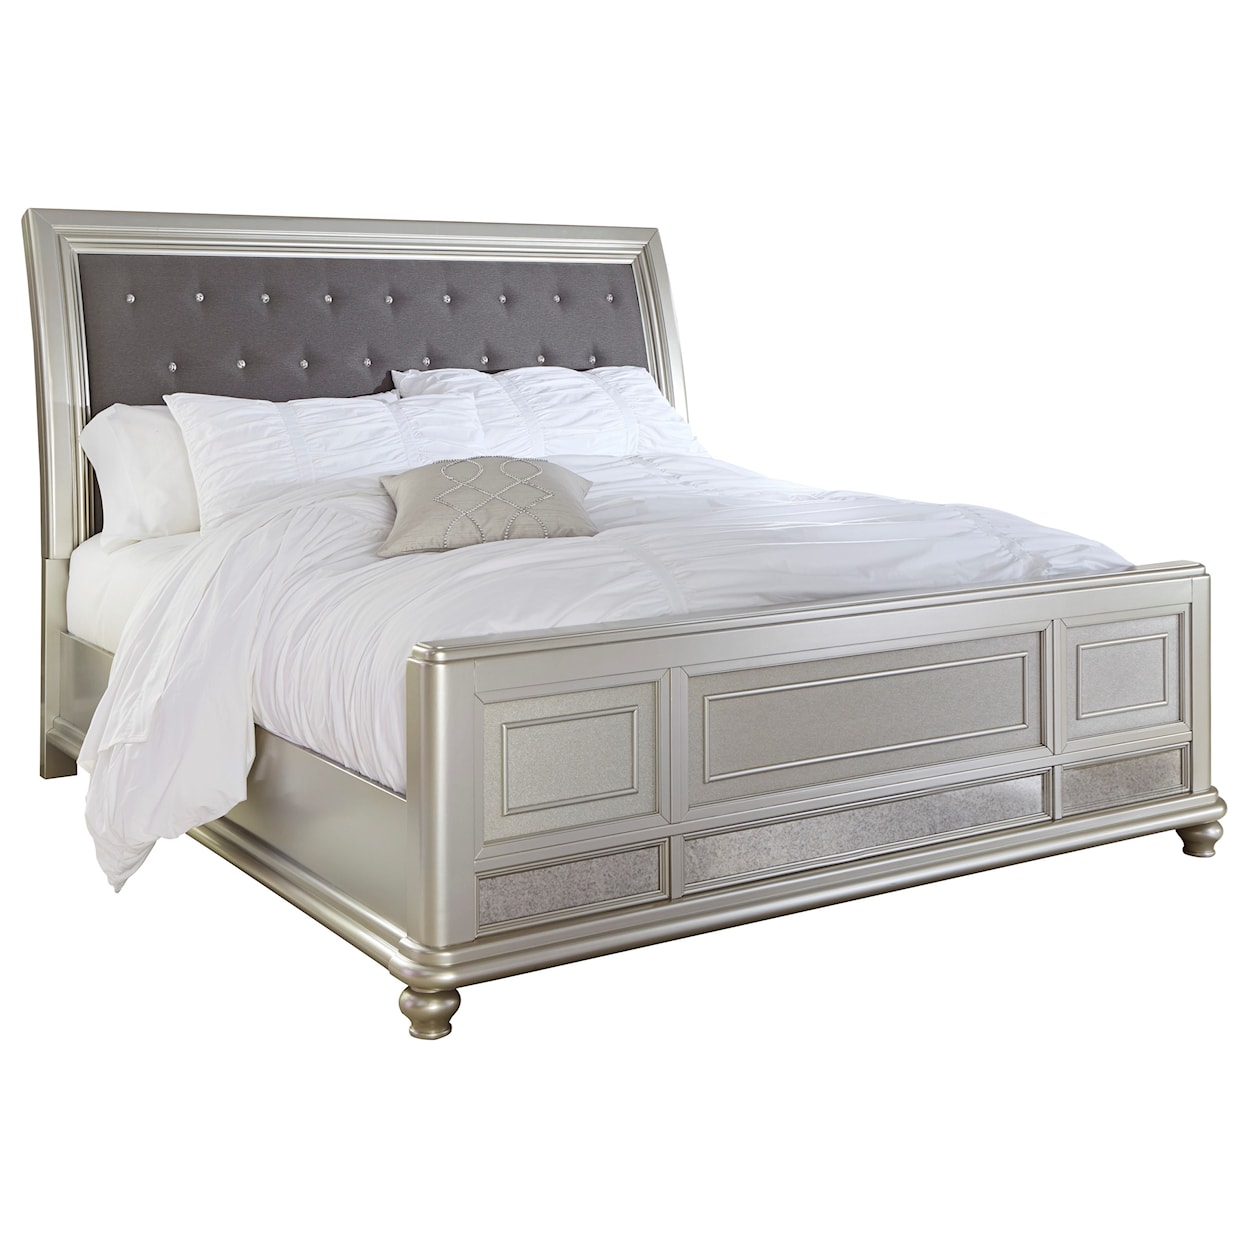 Signature Design by Ashley Coralayne Cal King Bed w/ Upholstered Sleigh Headboard